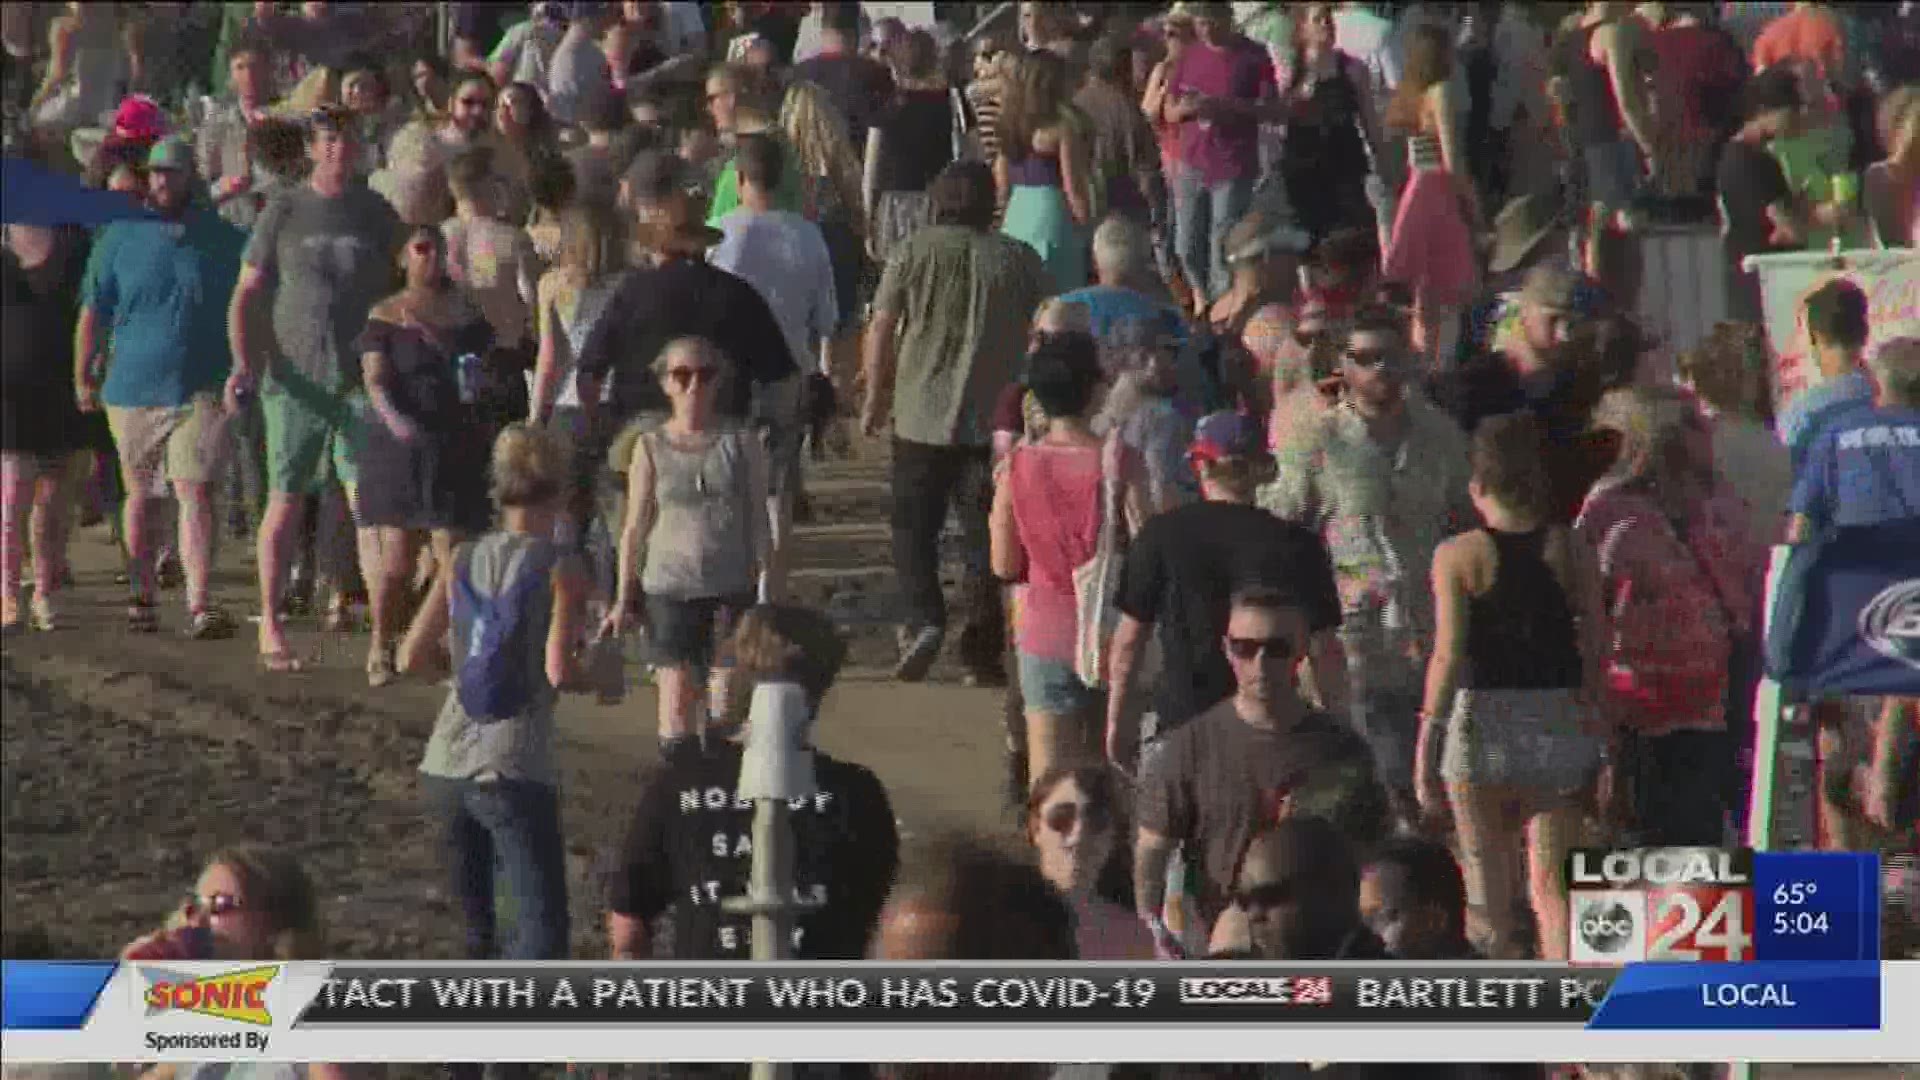 With Coachella being the latest event to postpone due to COVID-19, Memphis in May officials say there are no plans to cancel Beale St. Music Festival.